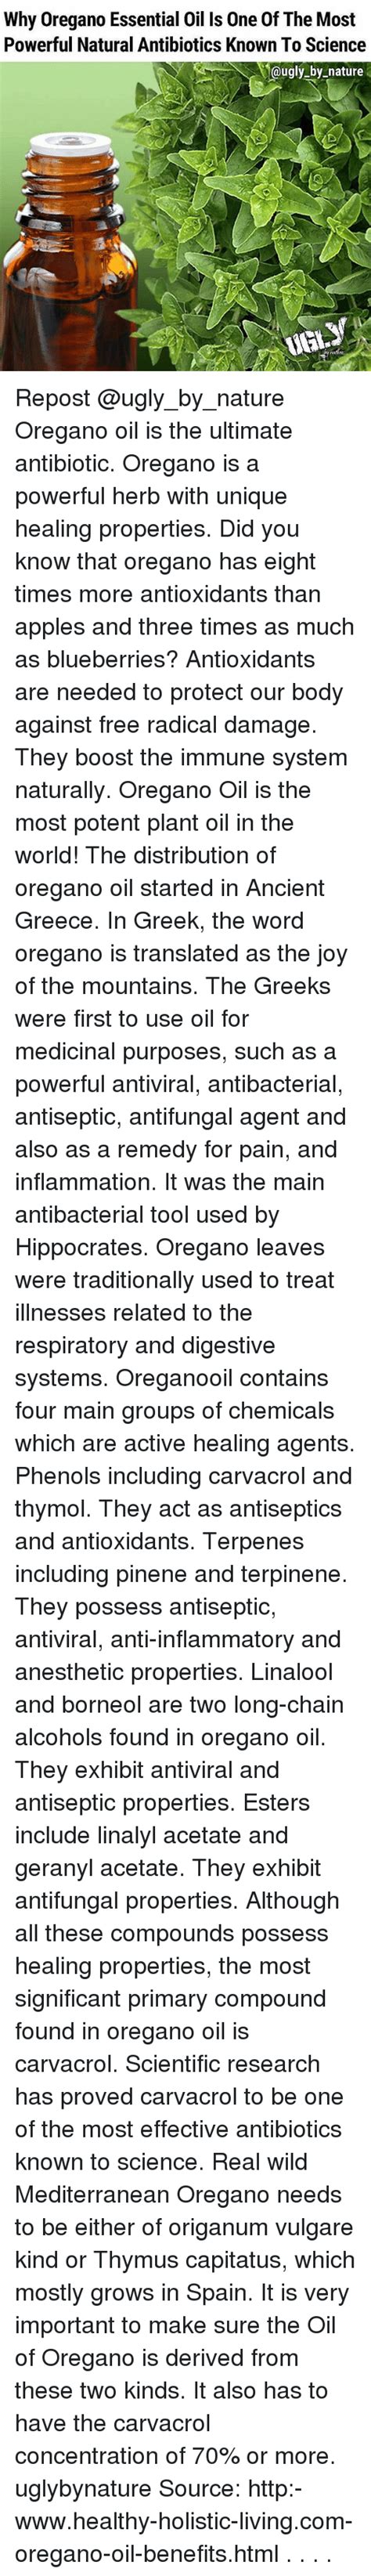 why oregano essential oil is one of the most powerful